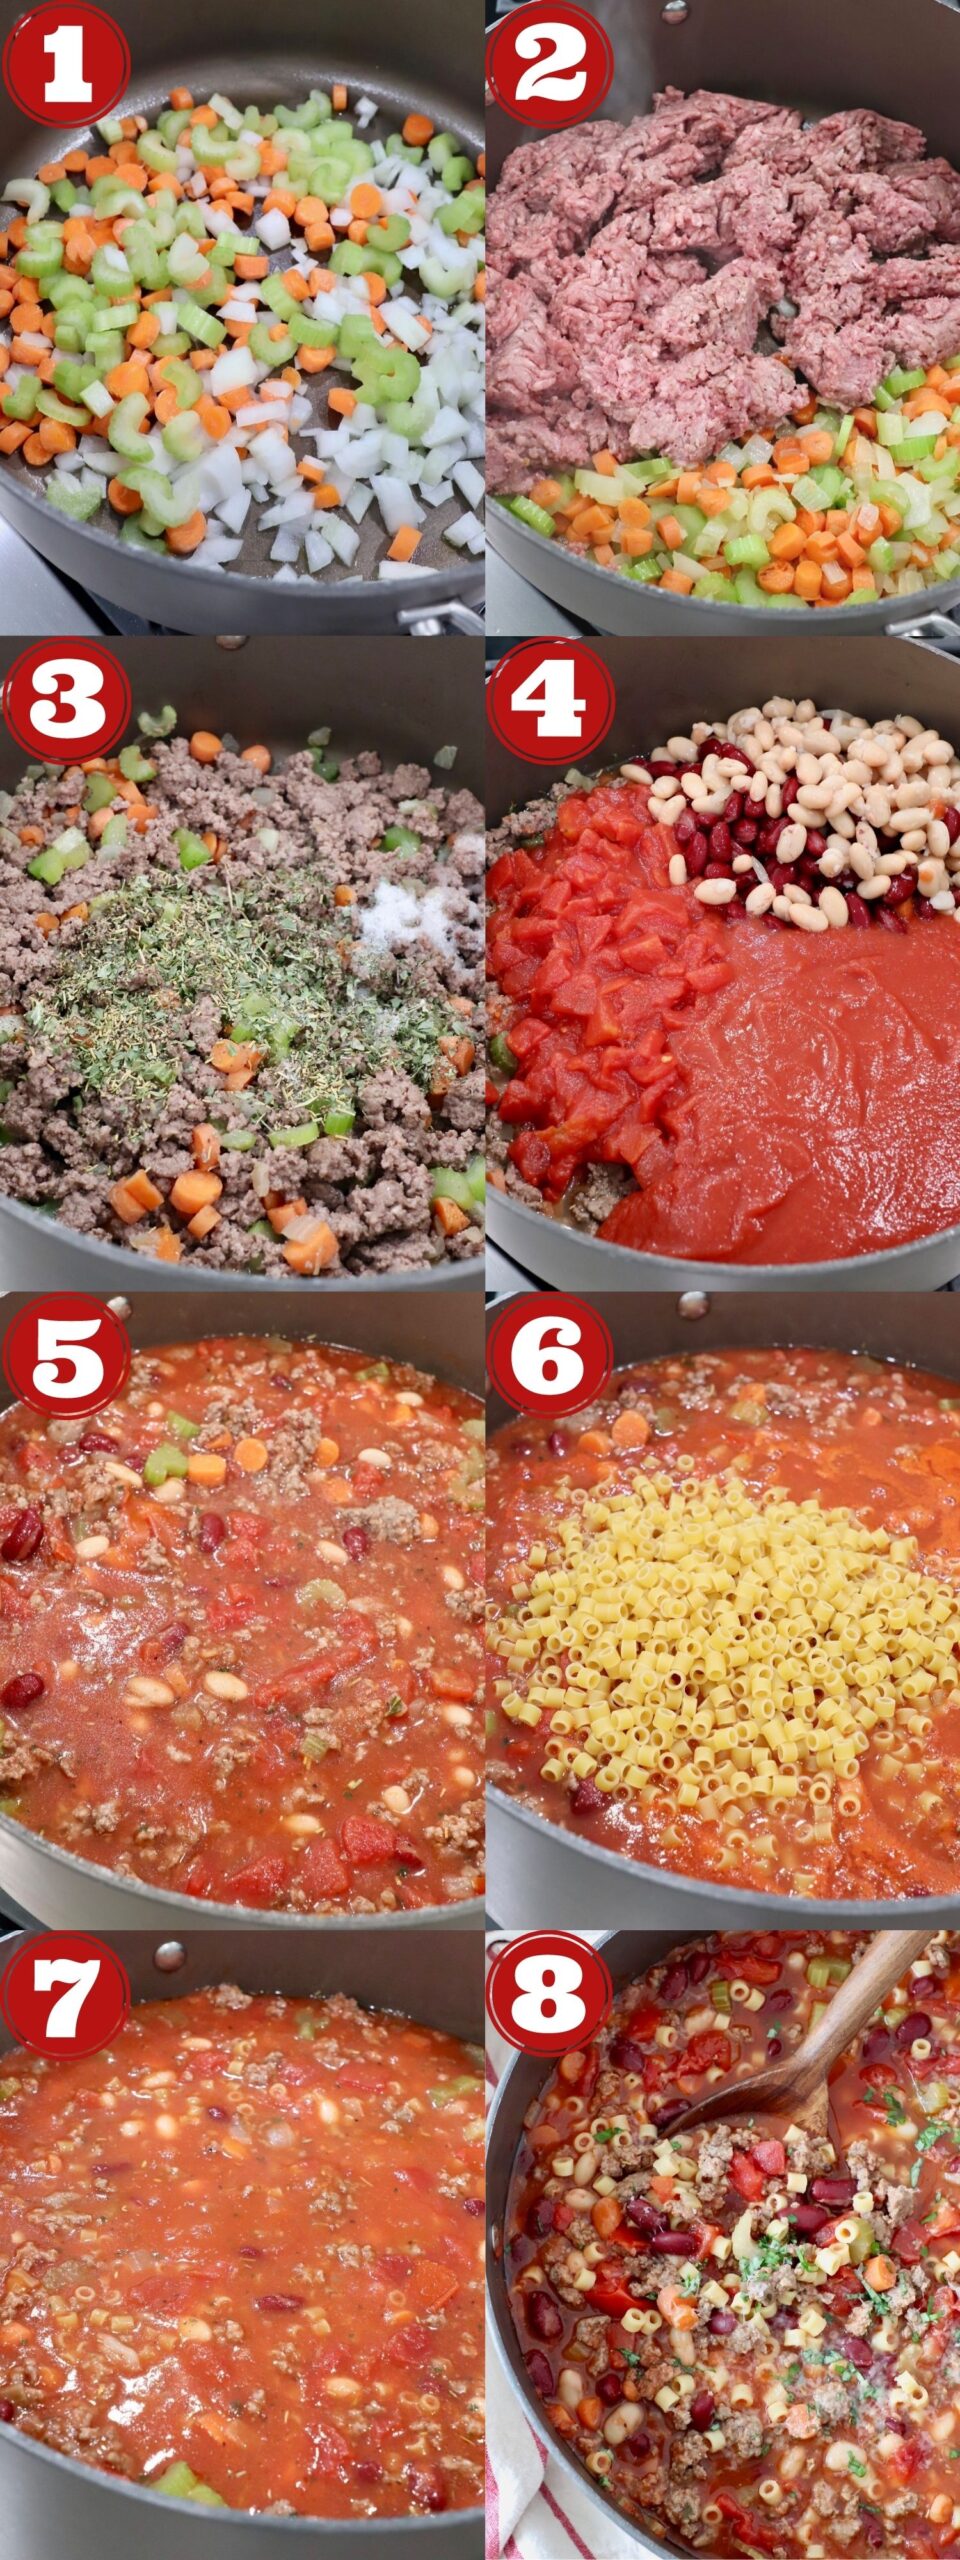 collage of images showing how to make pasta fagioli